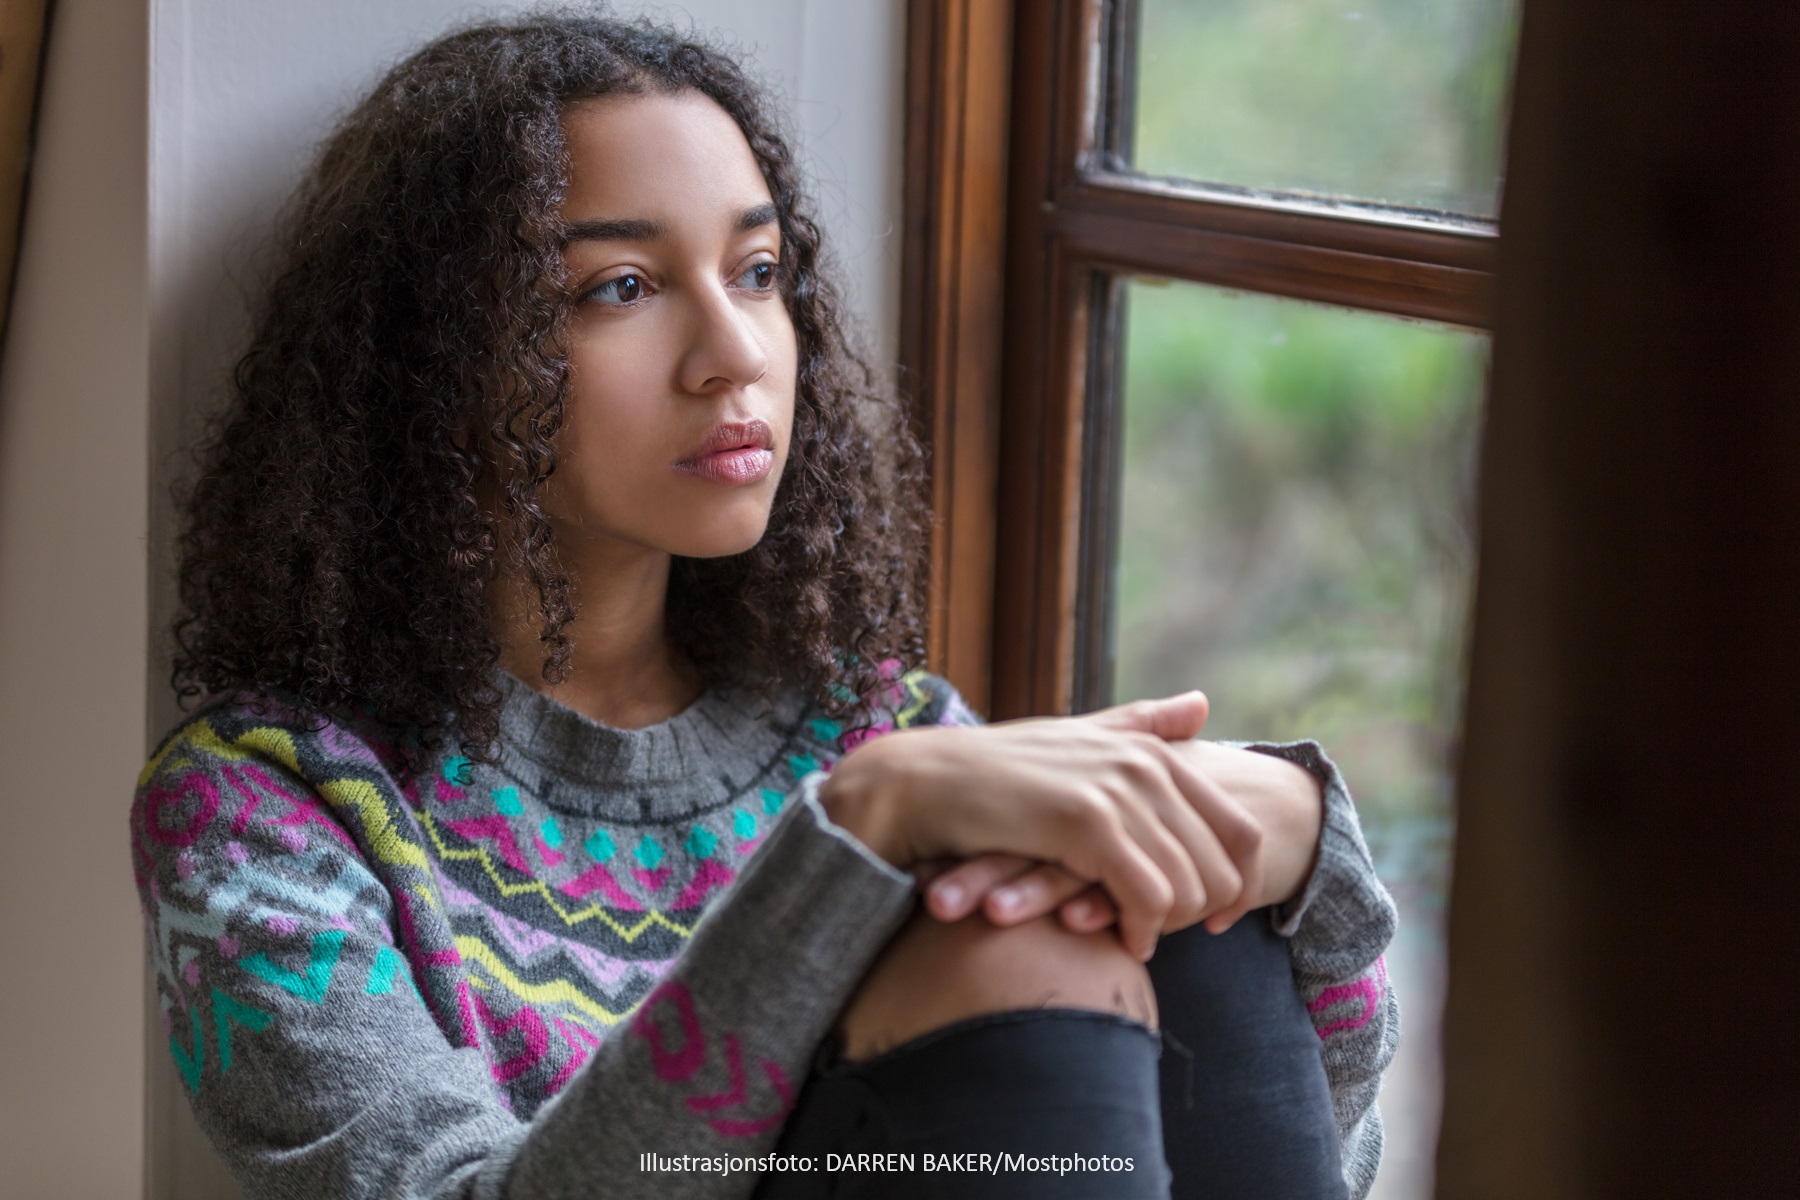 Illustration photo. A teenage girl sits alone by a window, looking out.